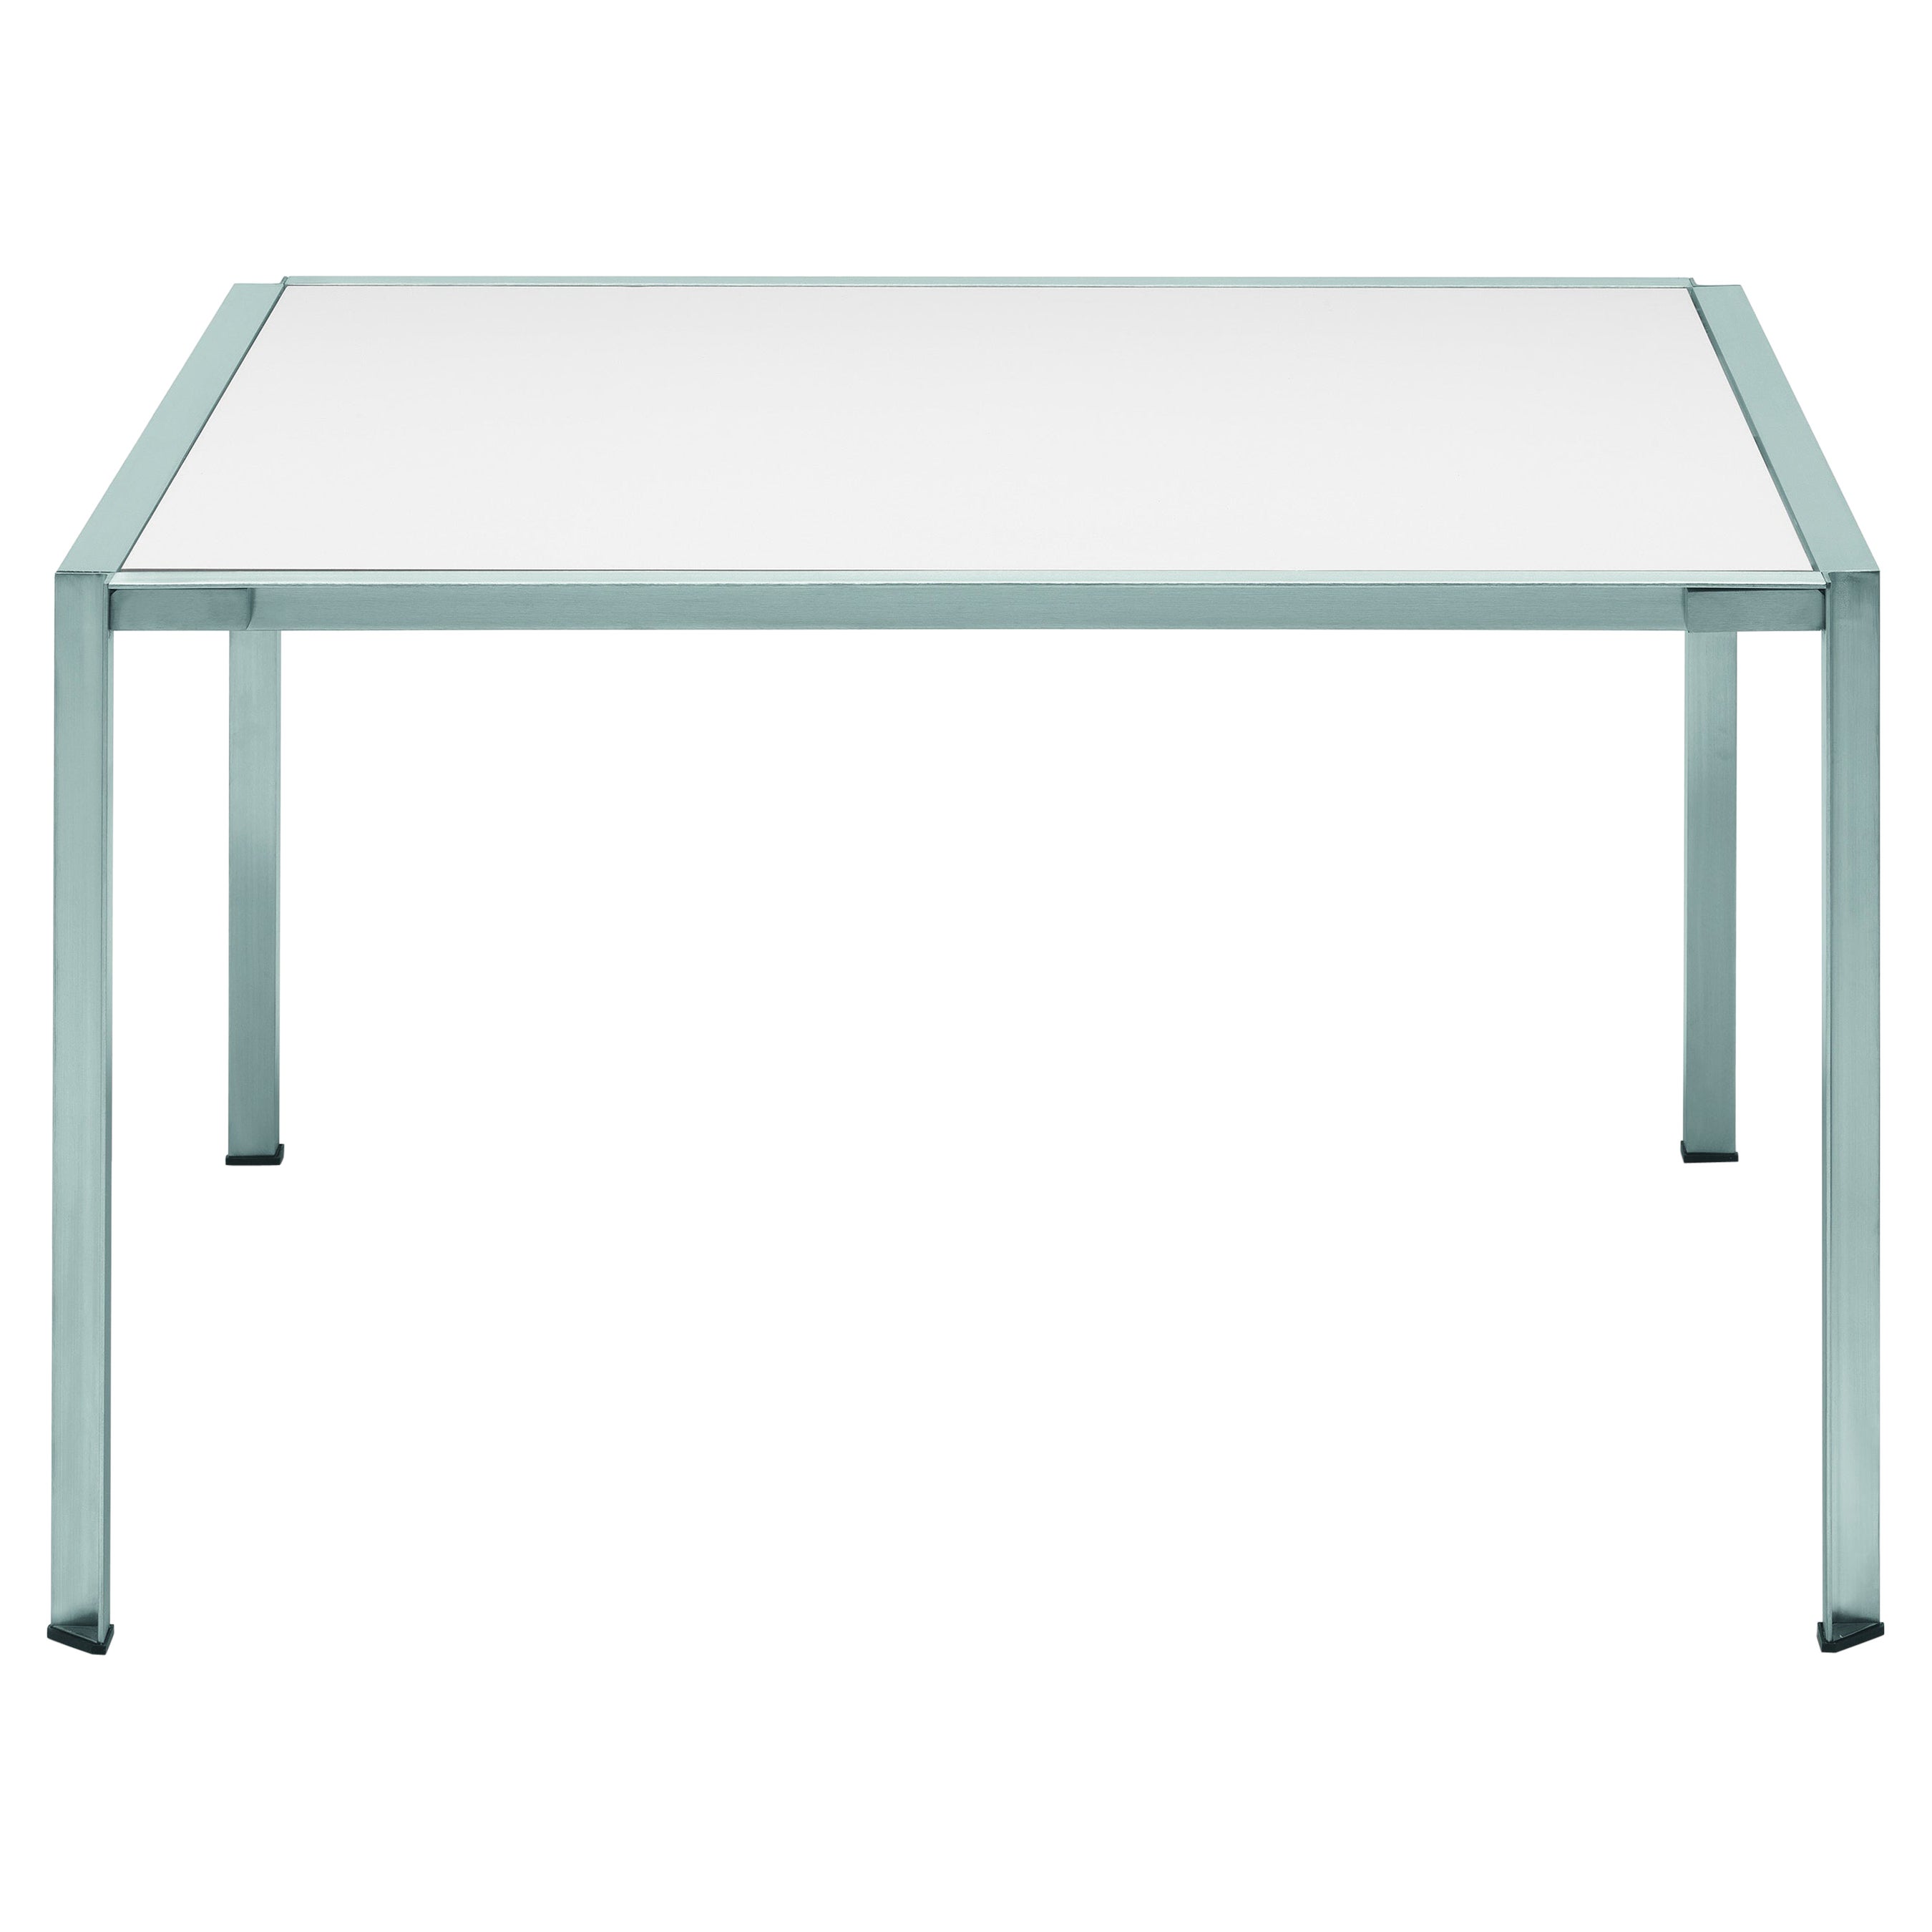 Alias 223_O Green Table with Brushed Stainless Steel Frame and Dekton Top 